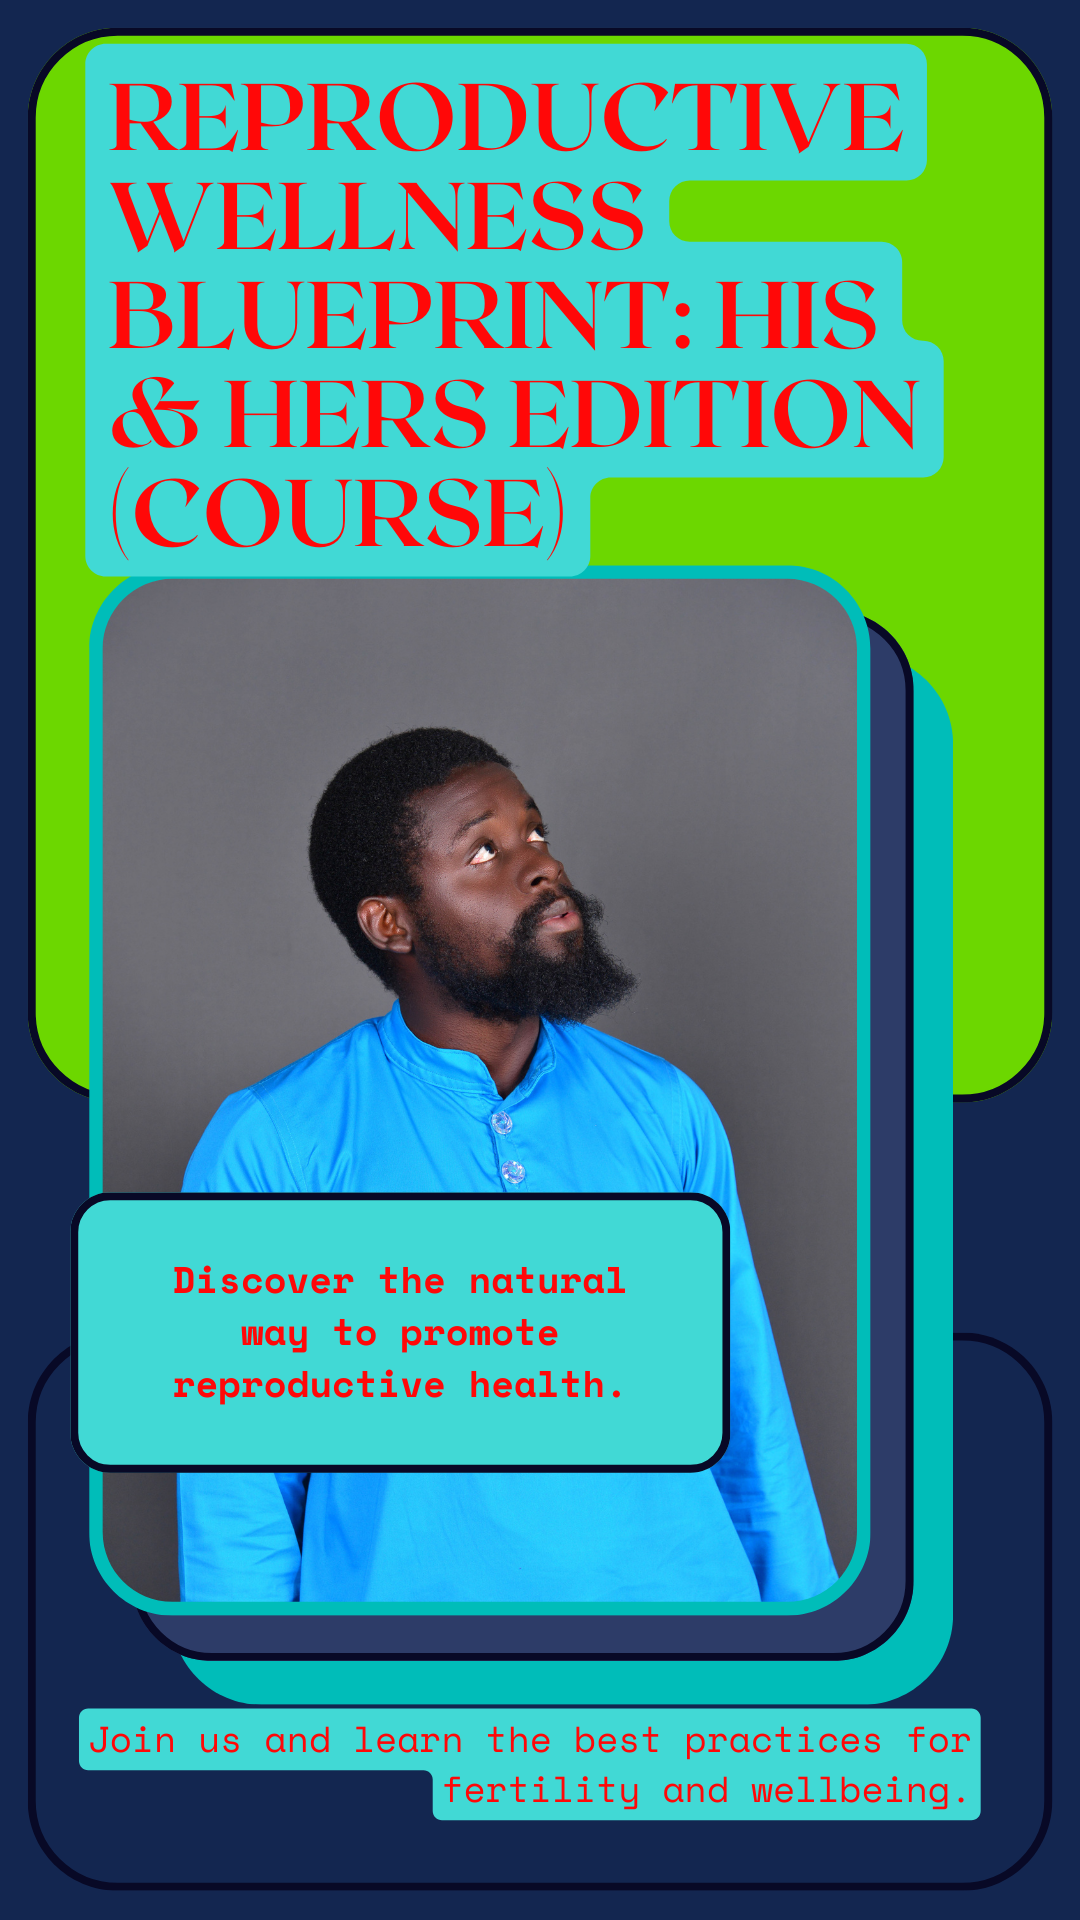 Reproductive Wellness Blueprint: His & Hers Edition (Course)